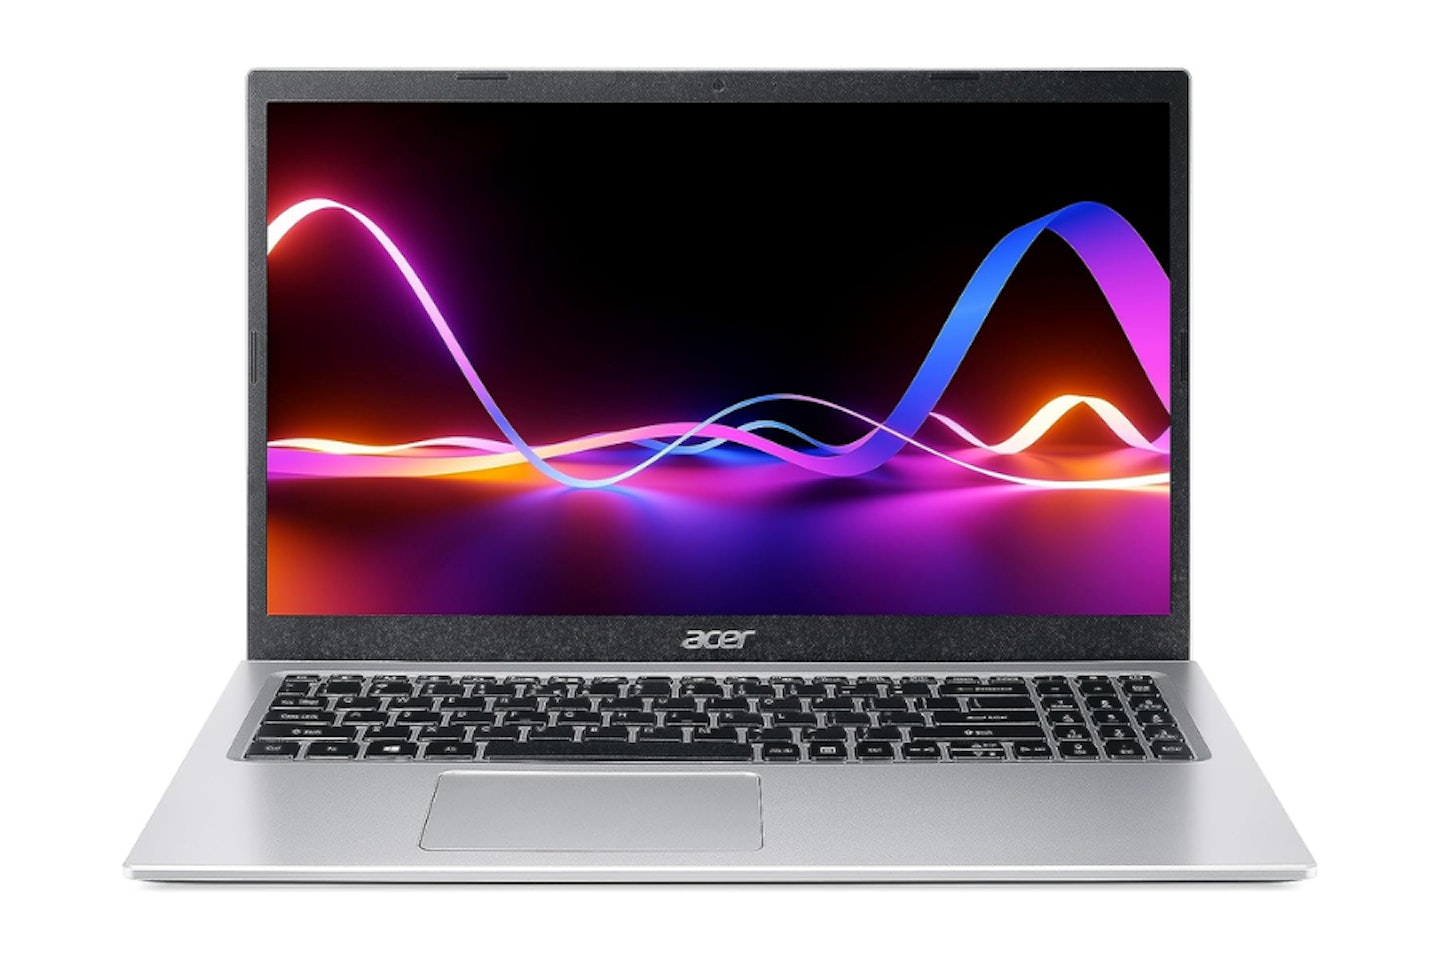  Acer Aspire 3 A315-58 15.6 Inch Laptop